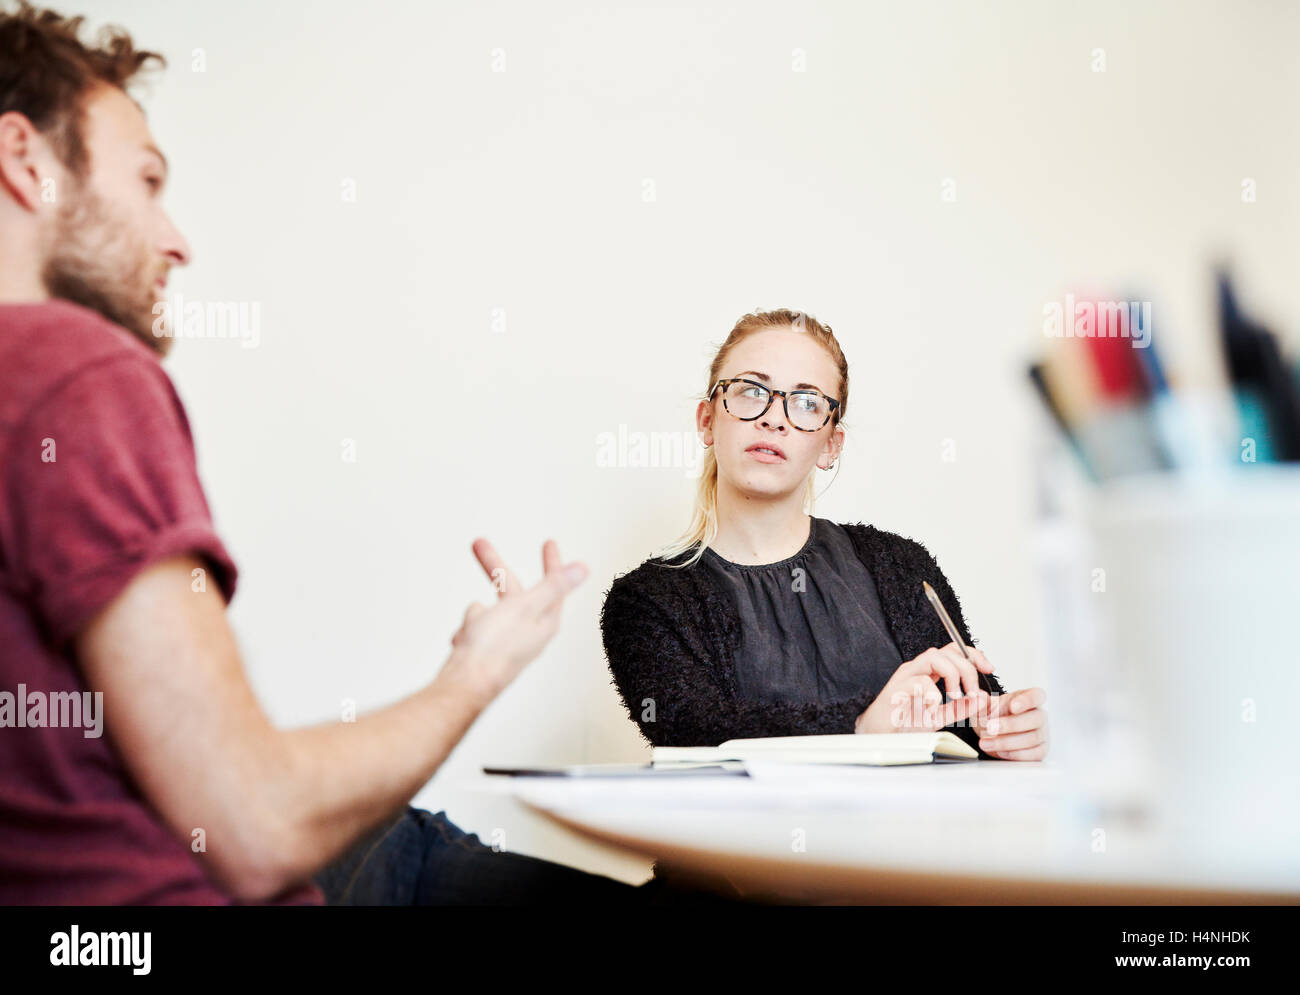 Two people at a meeting, a man gesticulating and a woman listening. Stock Photo